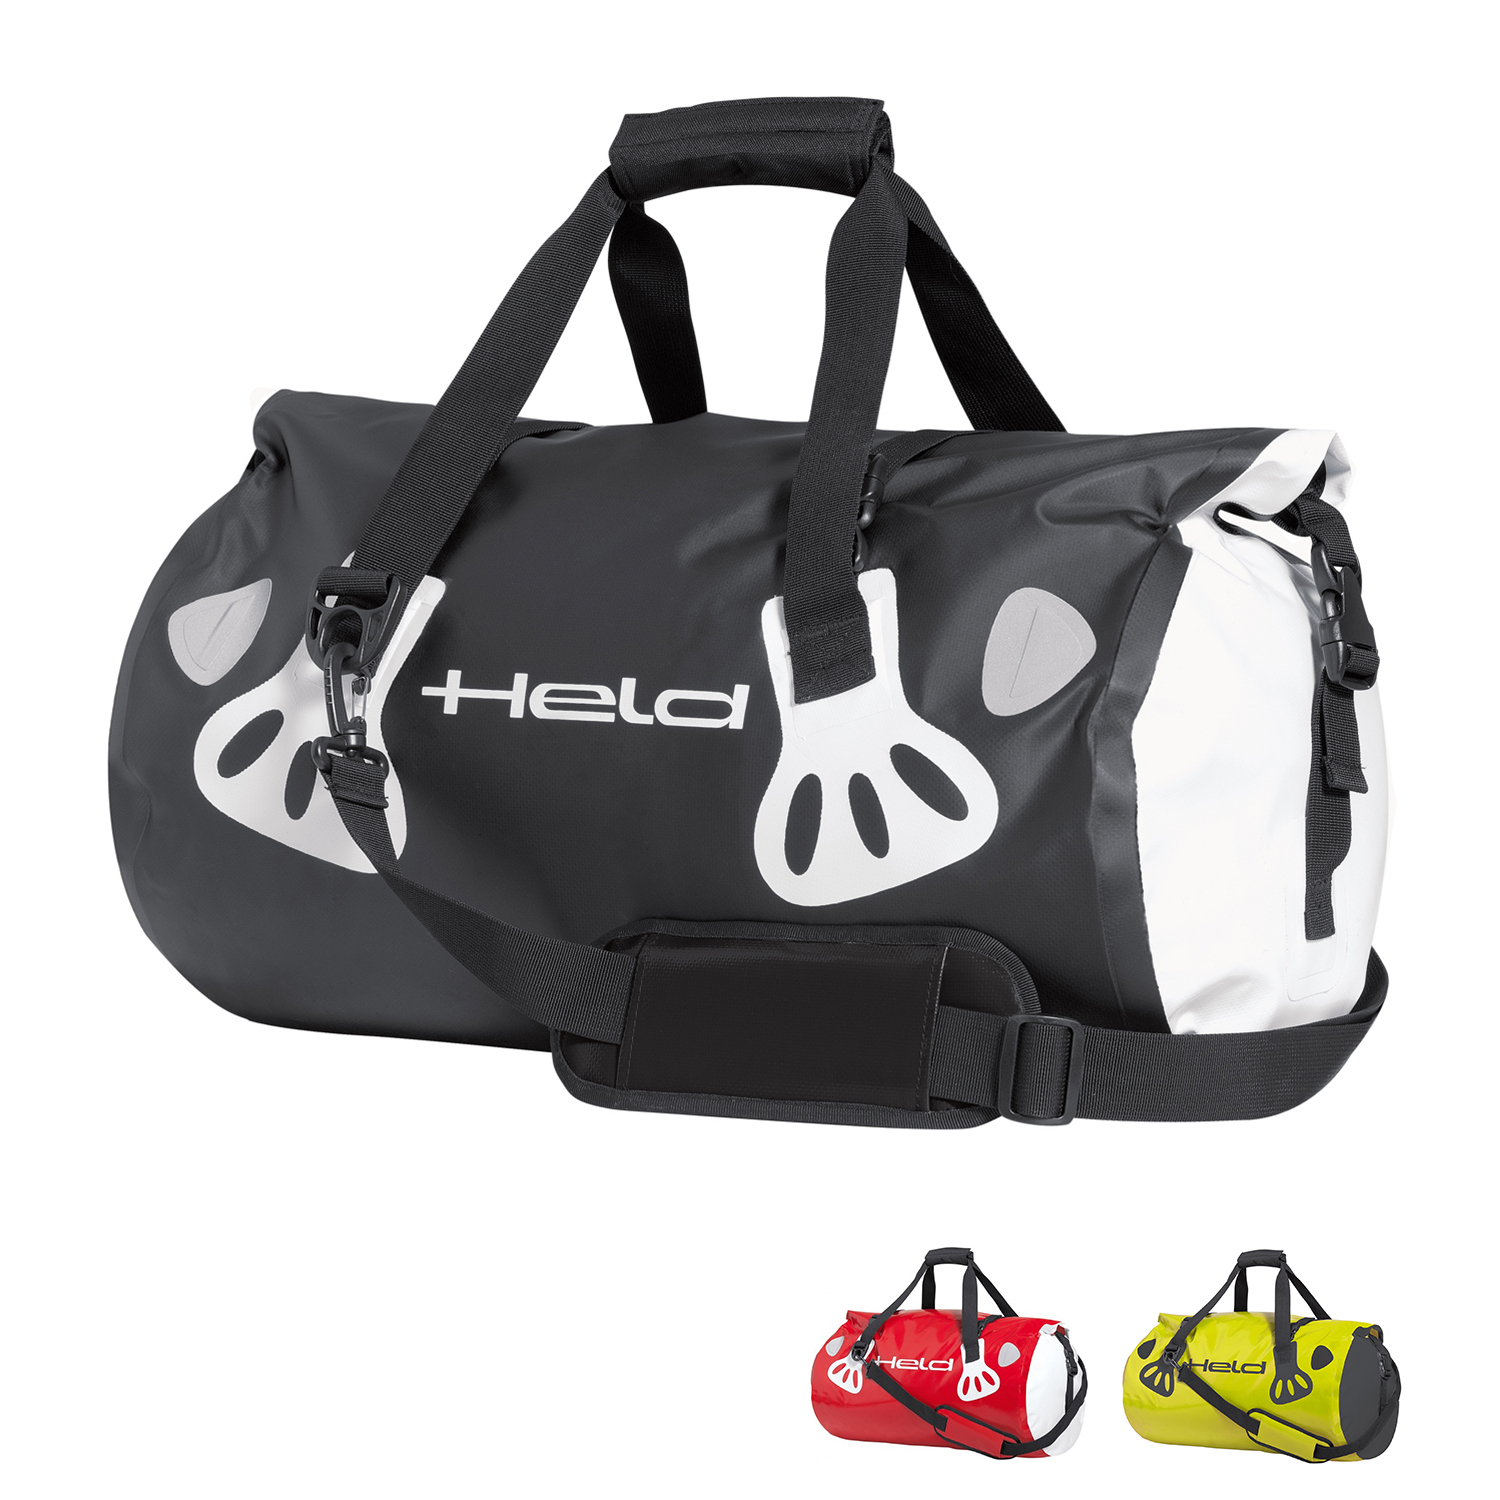 Held Carry Bag - Available in Various Colours and Sizes